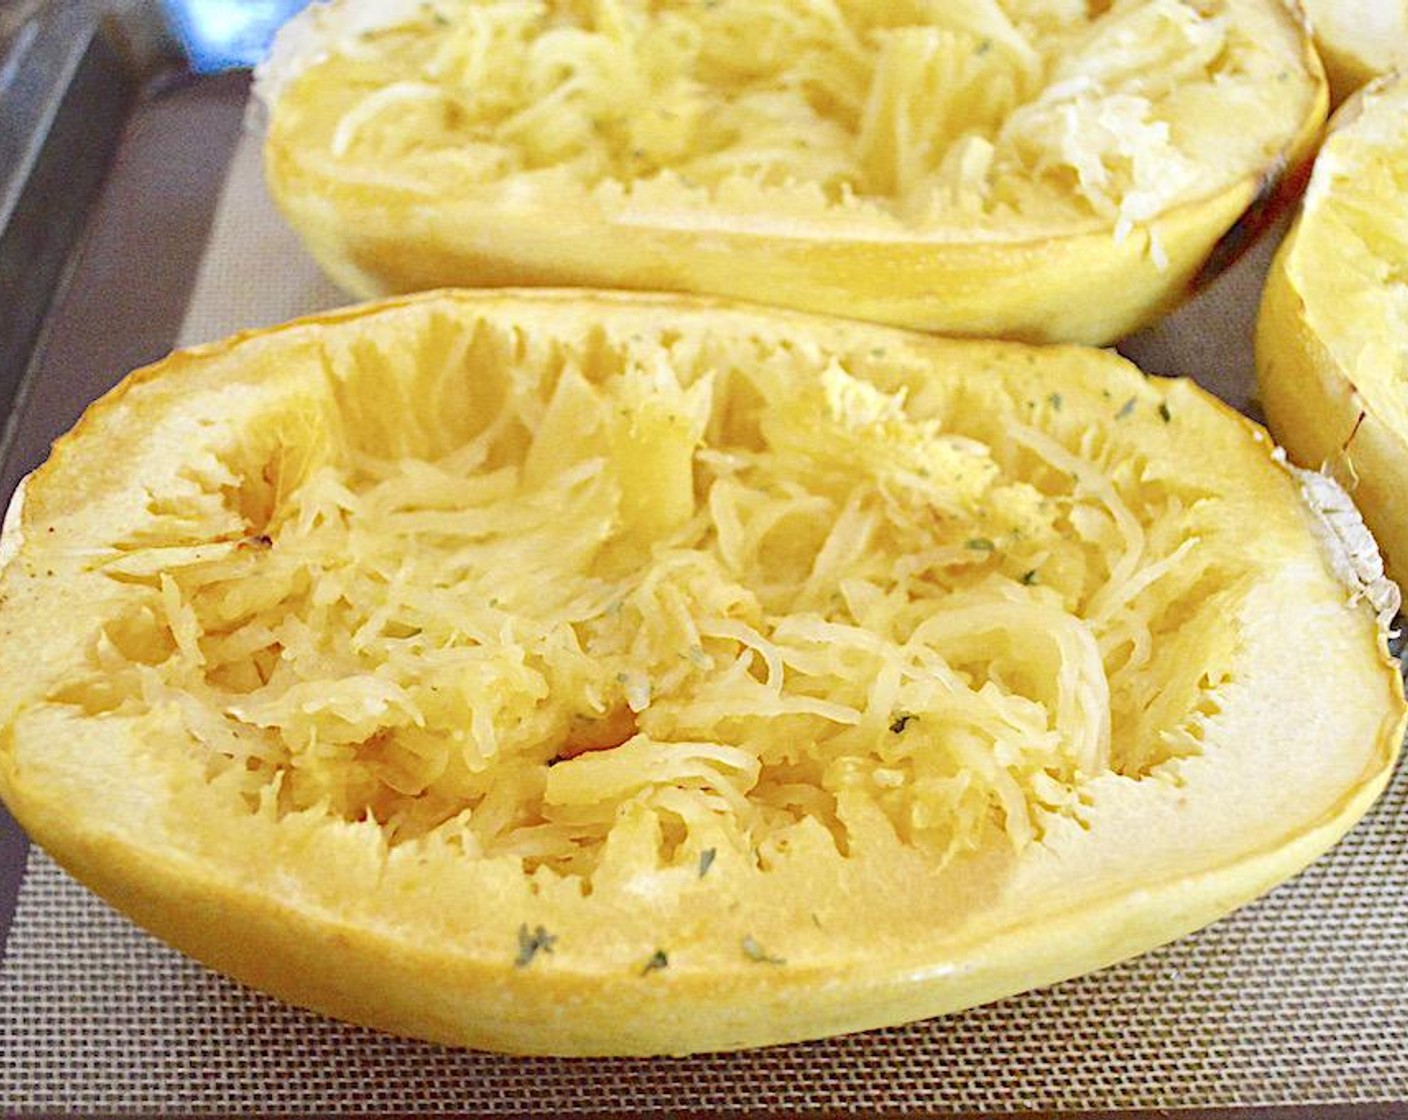 step 5 When the squash is done, take it out and reduce the oven temperature to 350 degrees F (180 degrees C). Use a fork to completely shred the flesh of the squash into tender "spaghetti," leaving it in its shell.